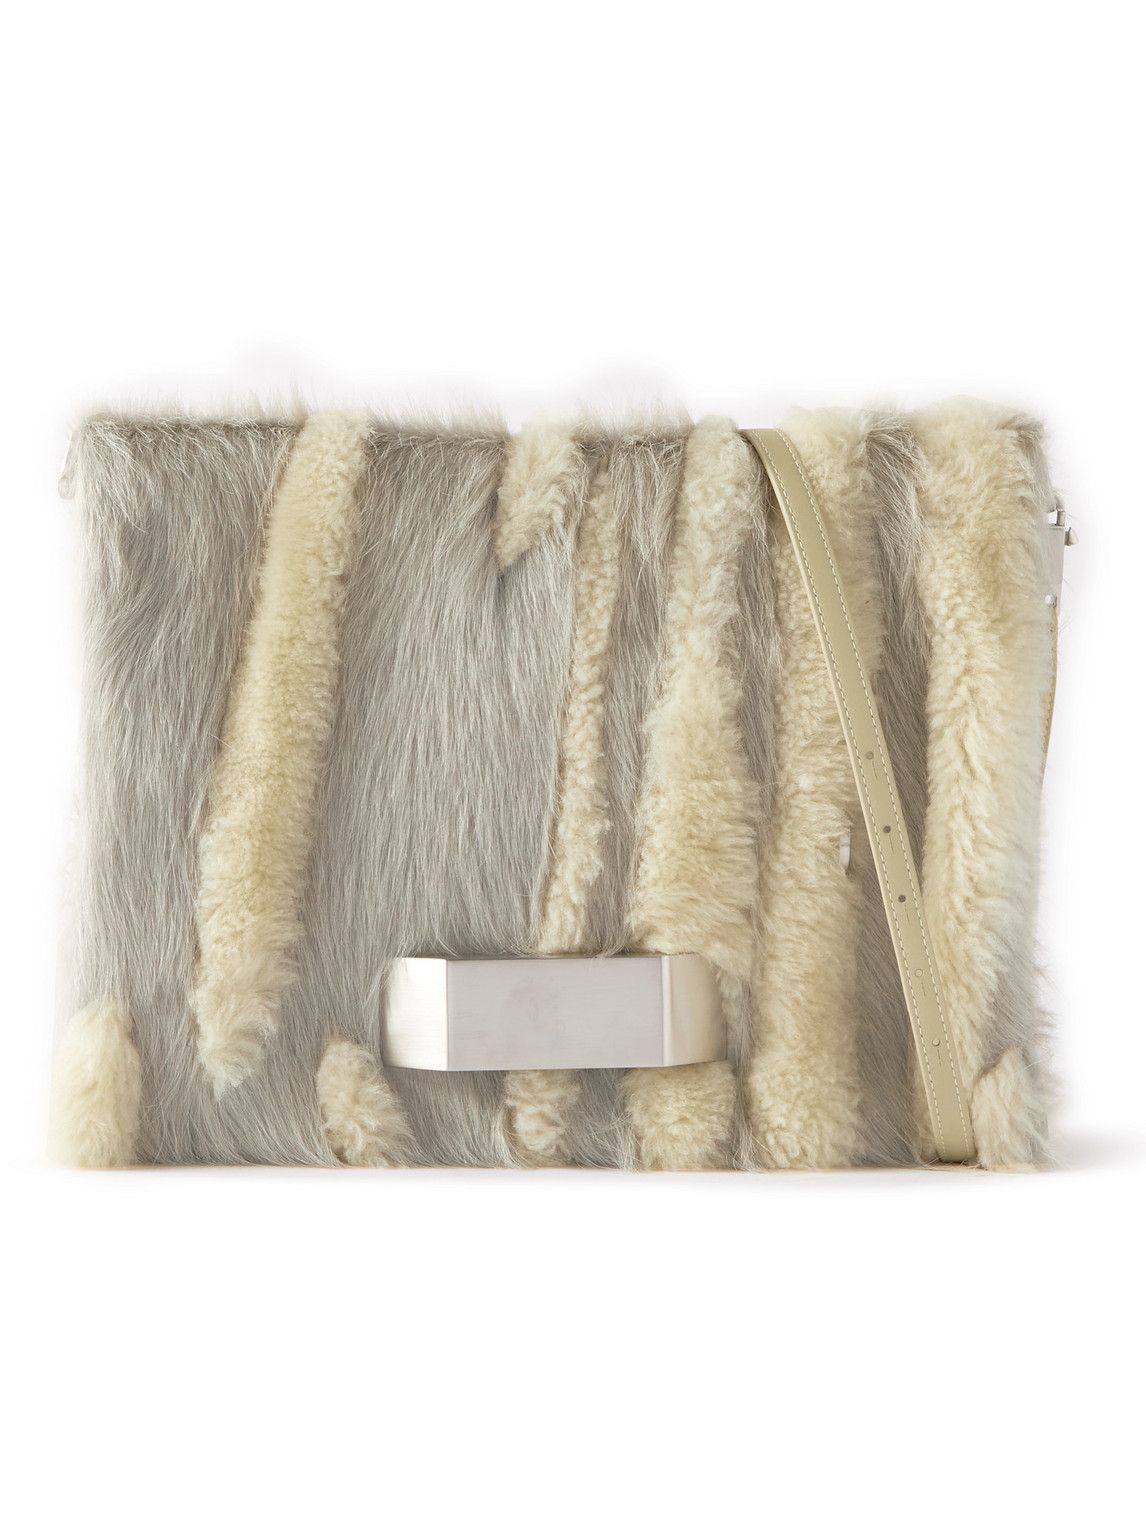 Rick Owens - Shearling, Pony Hair and Leather Messenger Bag